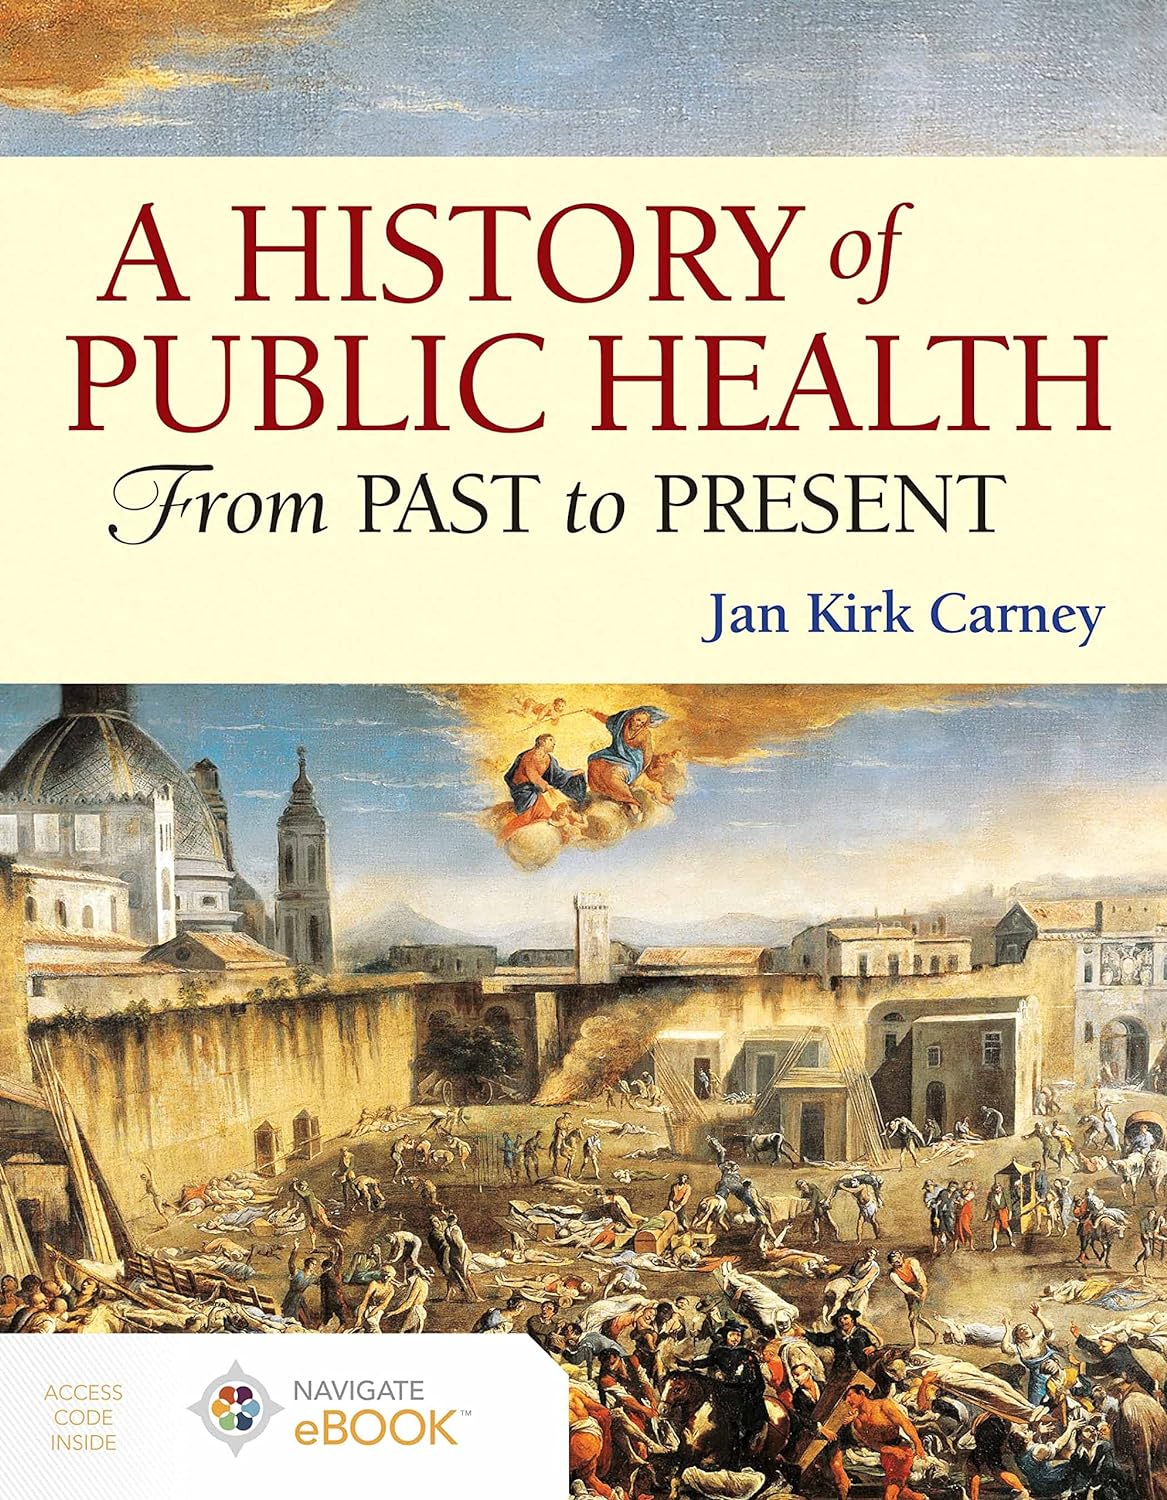 A History of Public Health: From_ Past to Present  by Jan Kirk Carney 